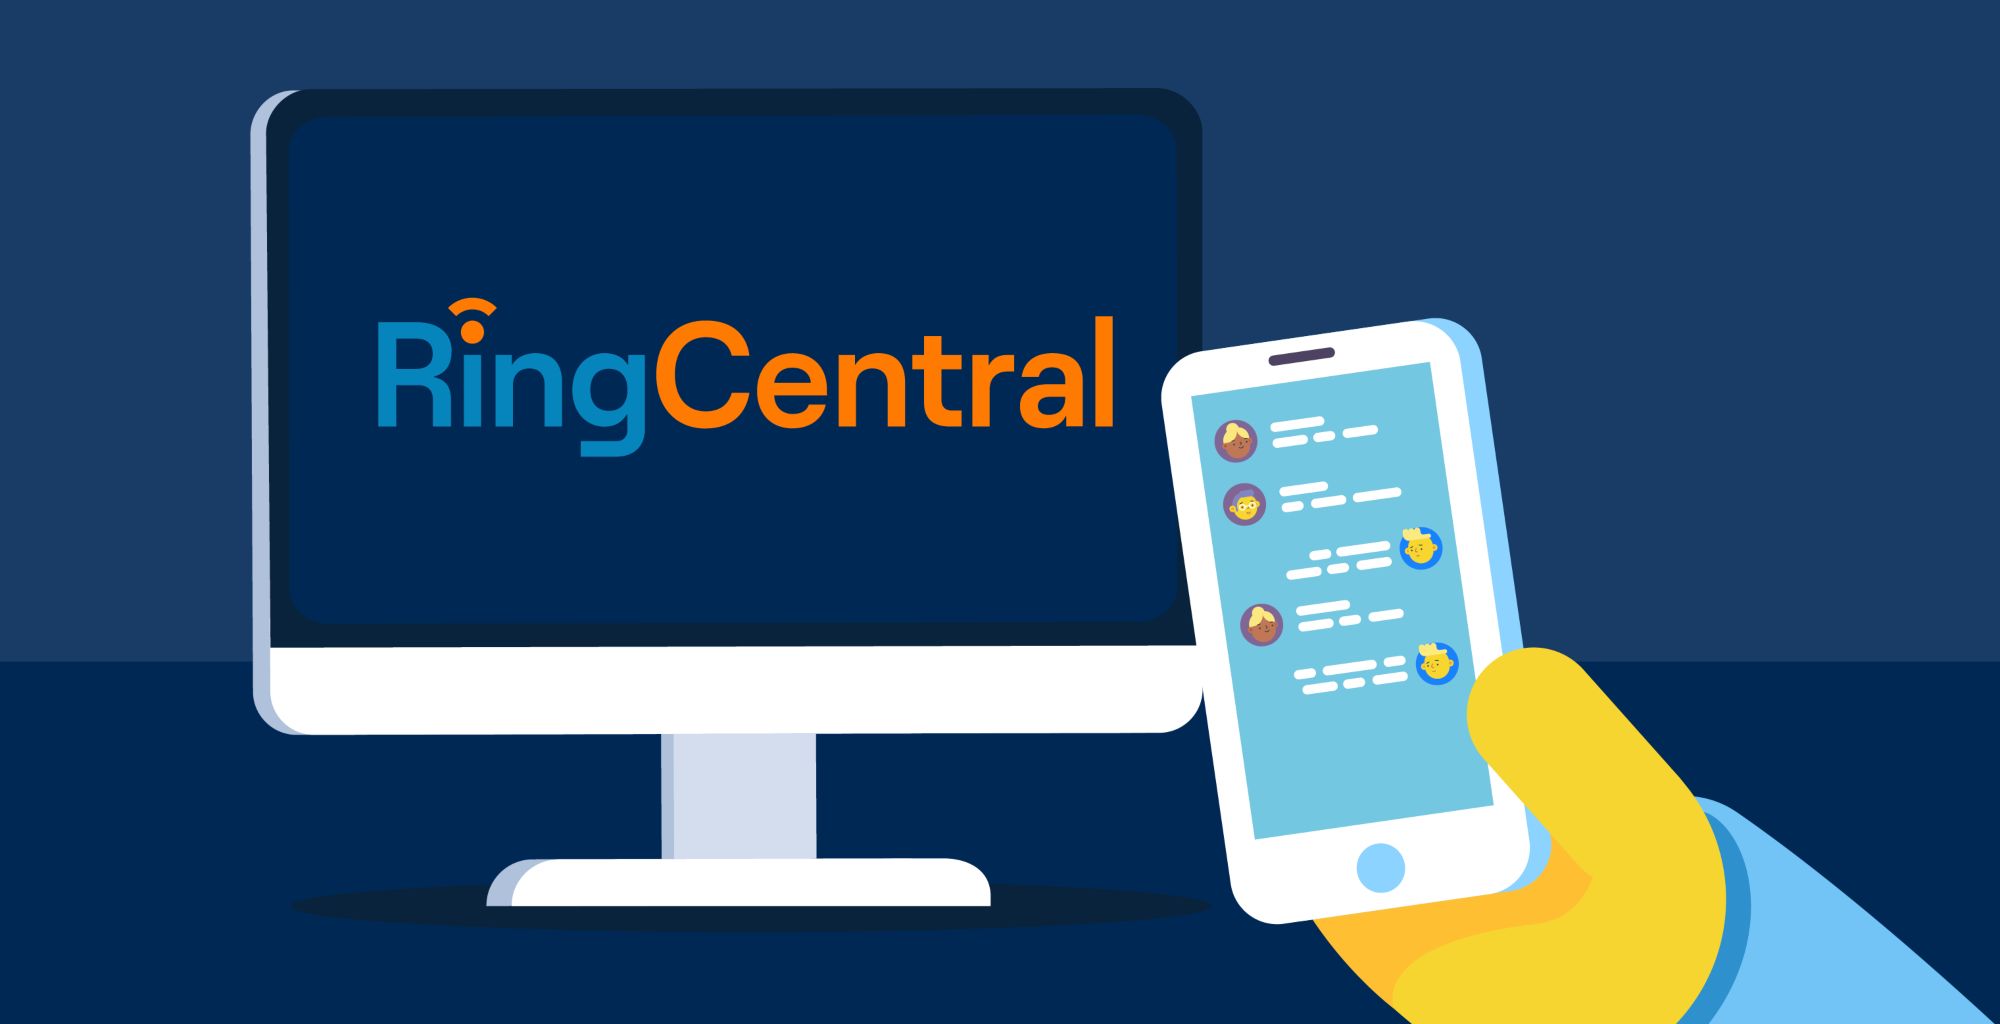 Article - What is RingCentral?